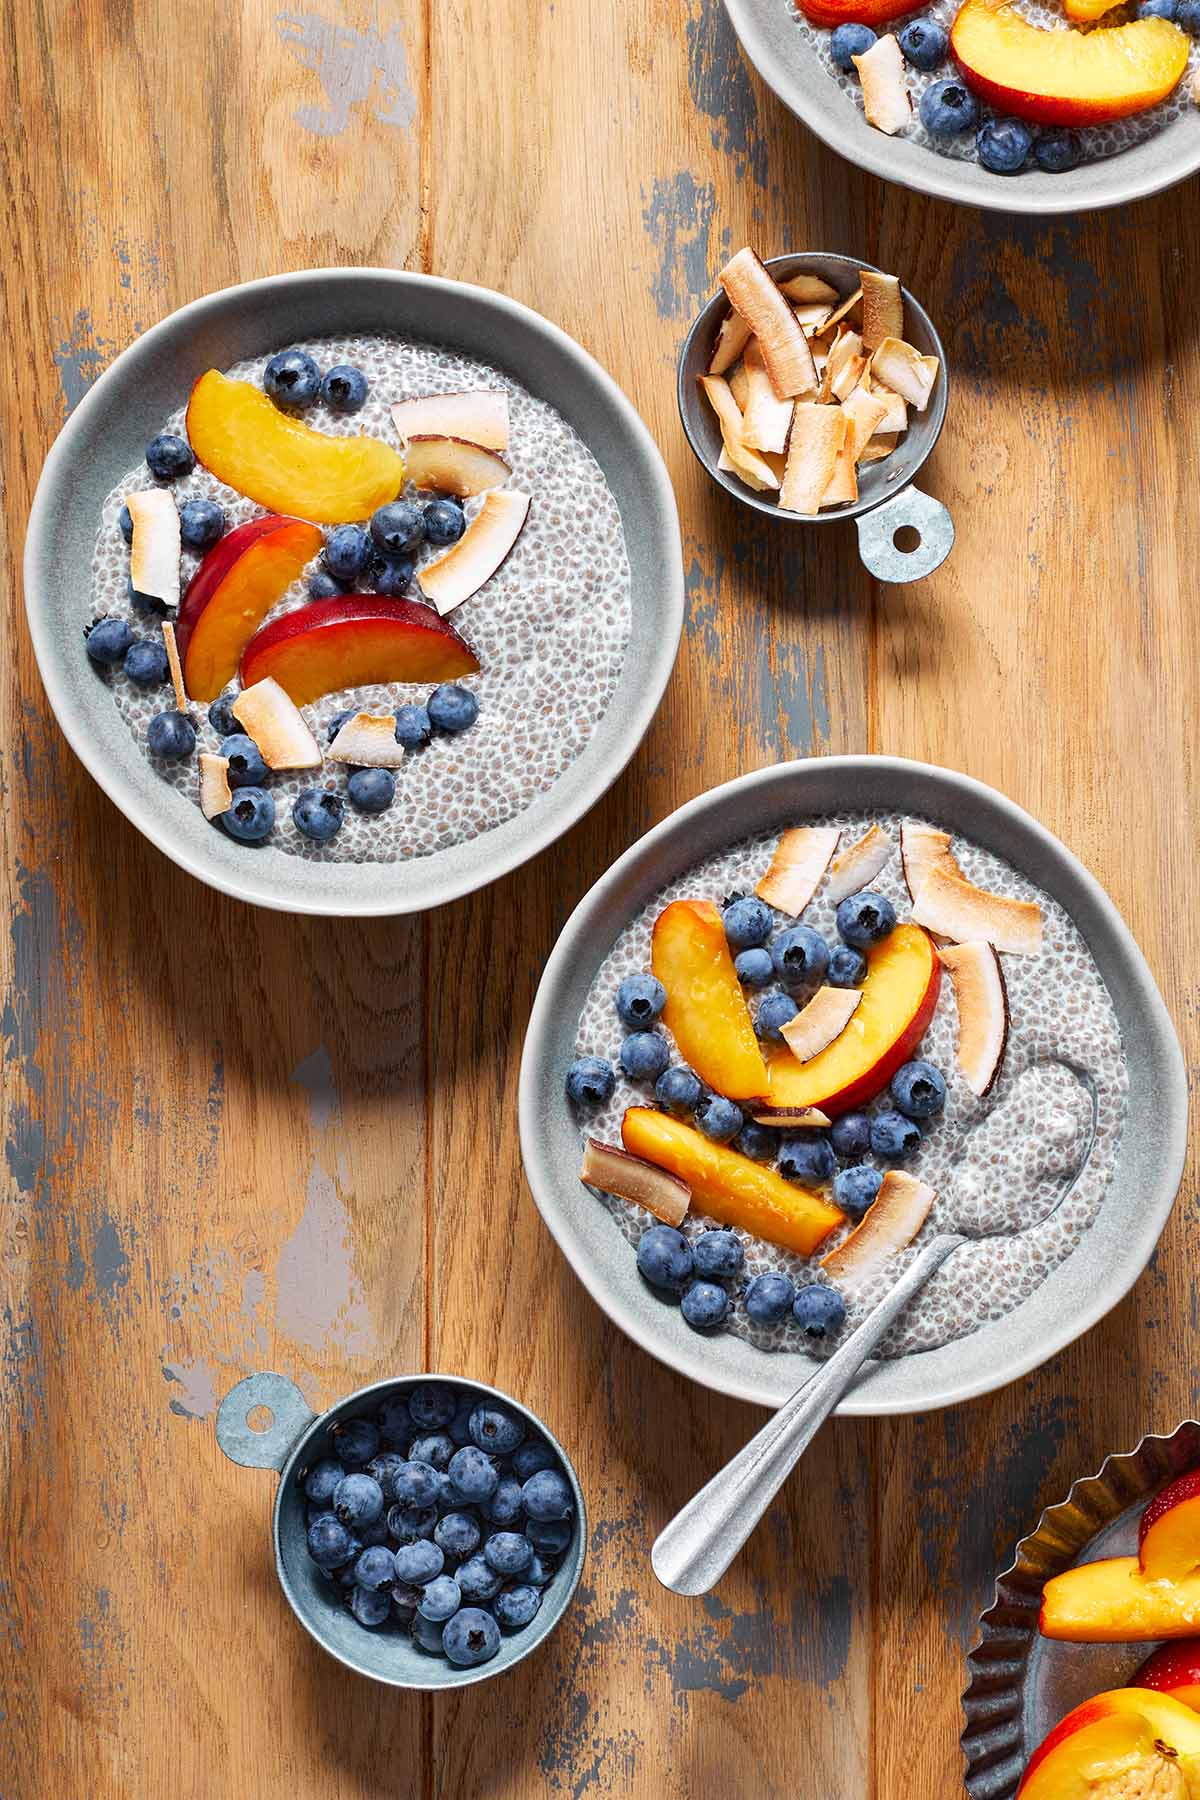 Two bowls of chia pudding topped with fruit and arranged on a wooden table.